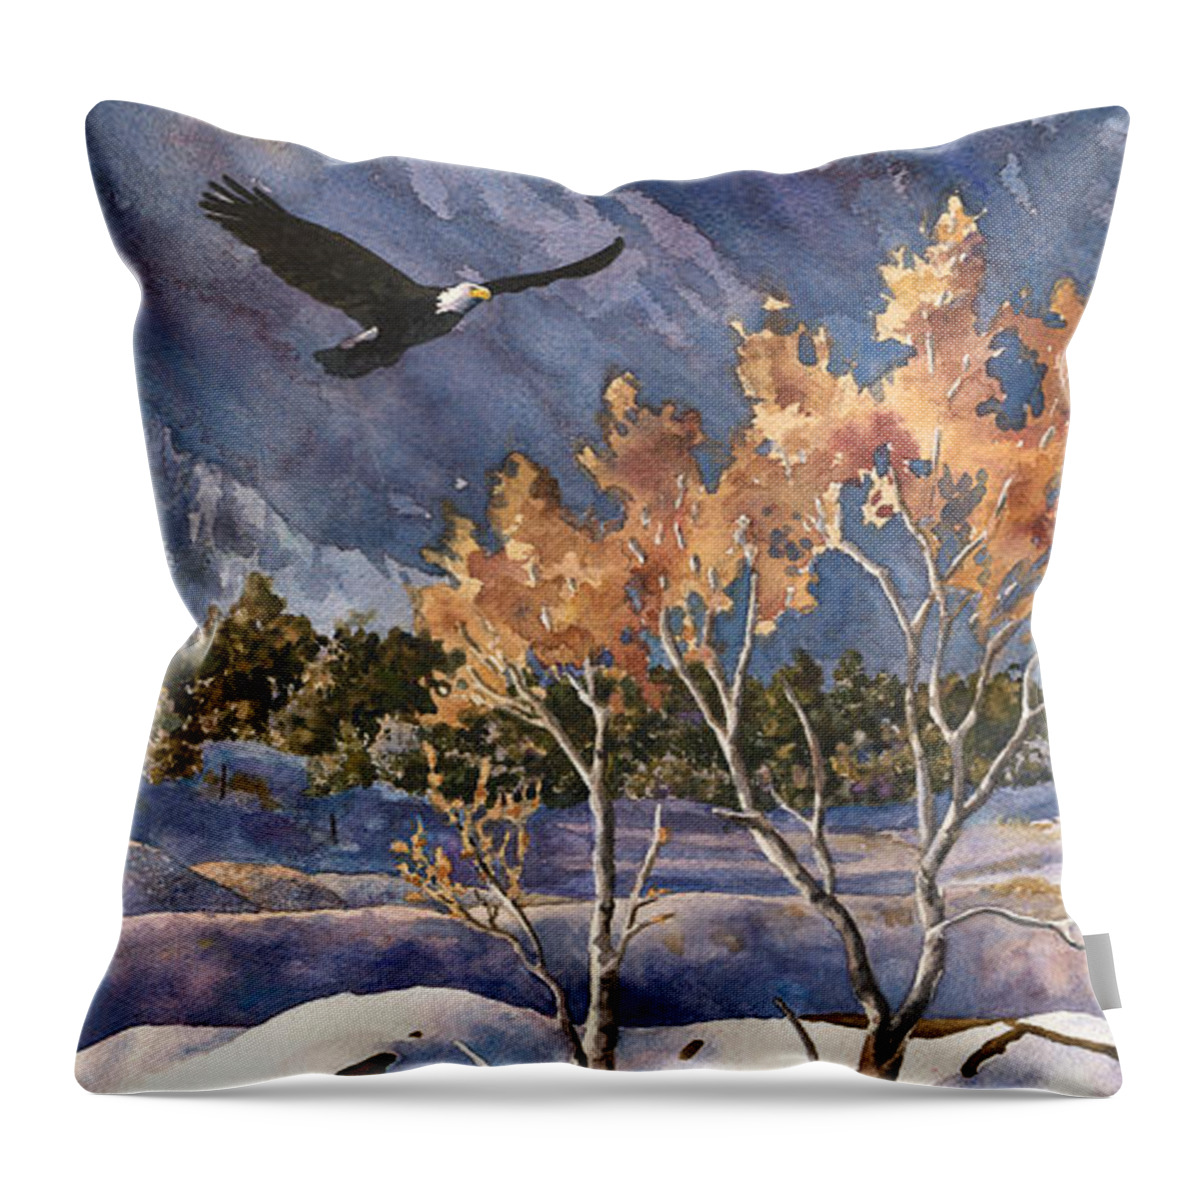 Colorado Rocky Mountain Painting Throw Pillow featuring the painting Winter Drift by Anne Gifford